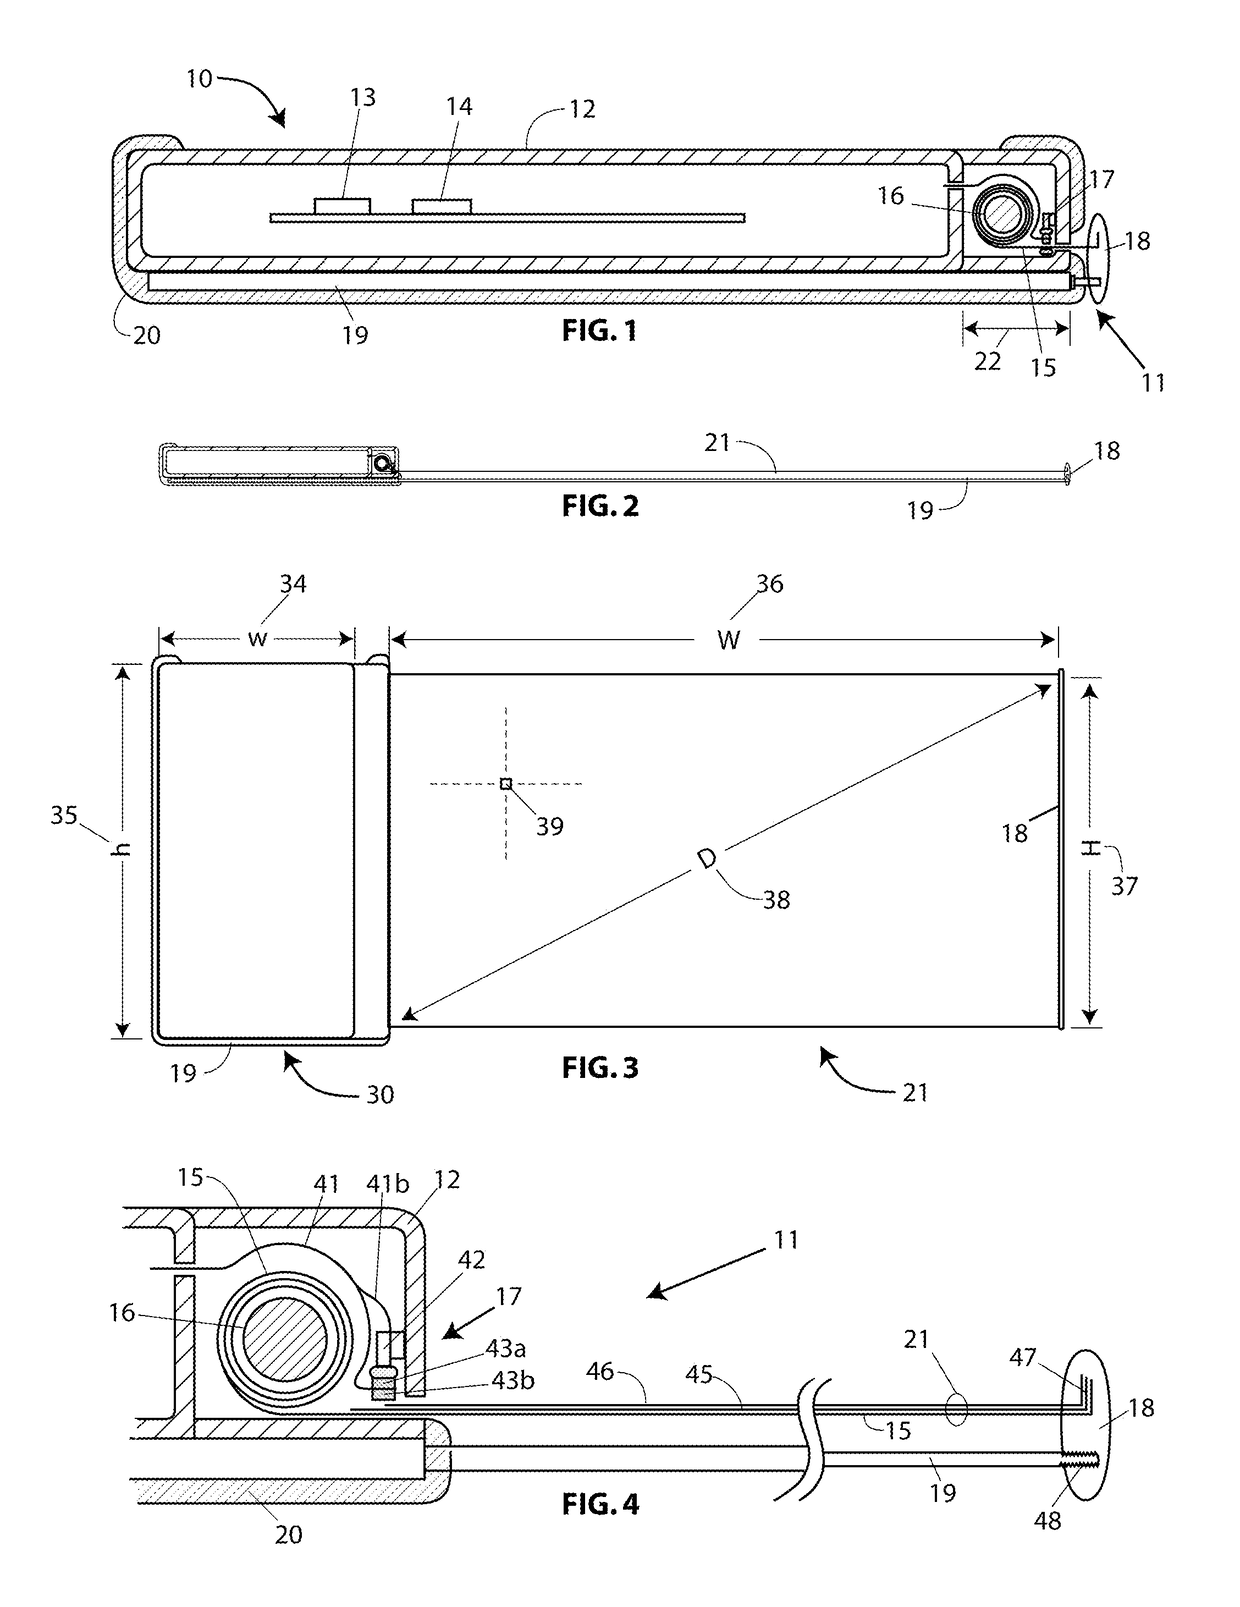 Method and system for deploying a flexible device